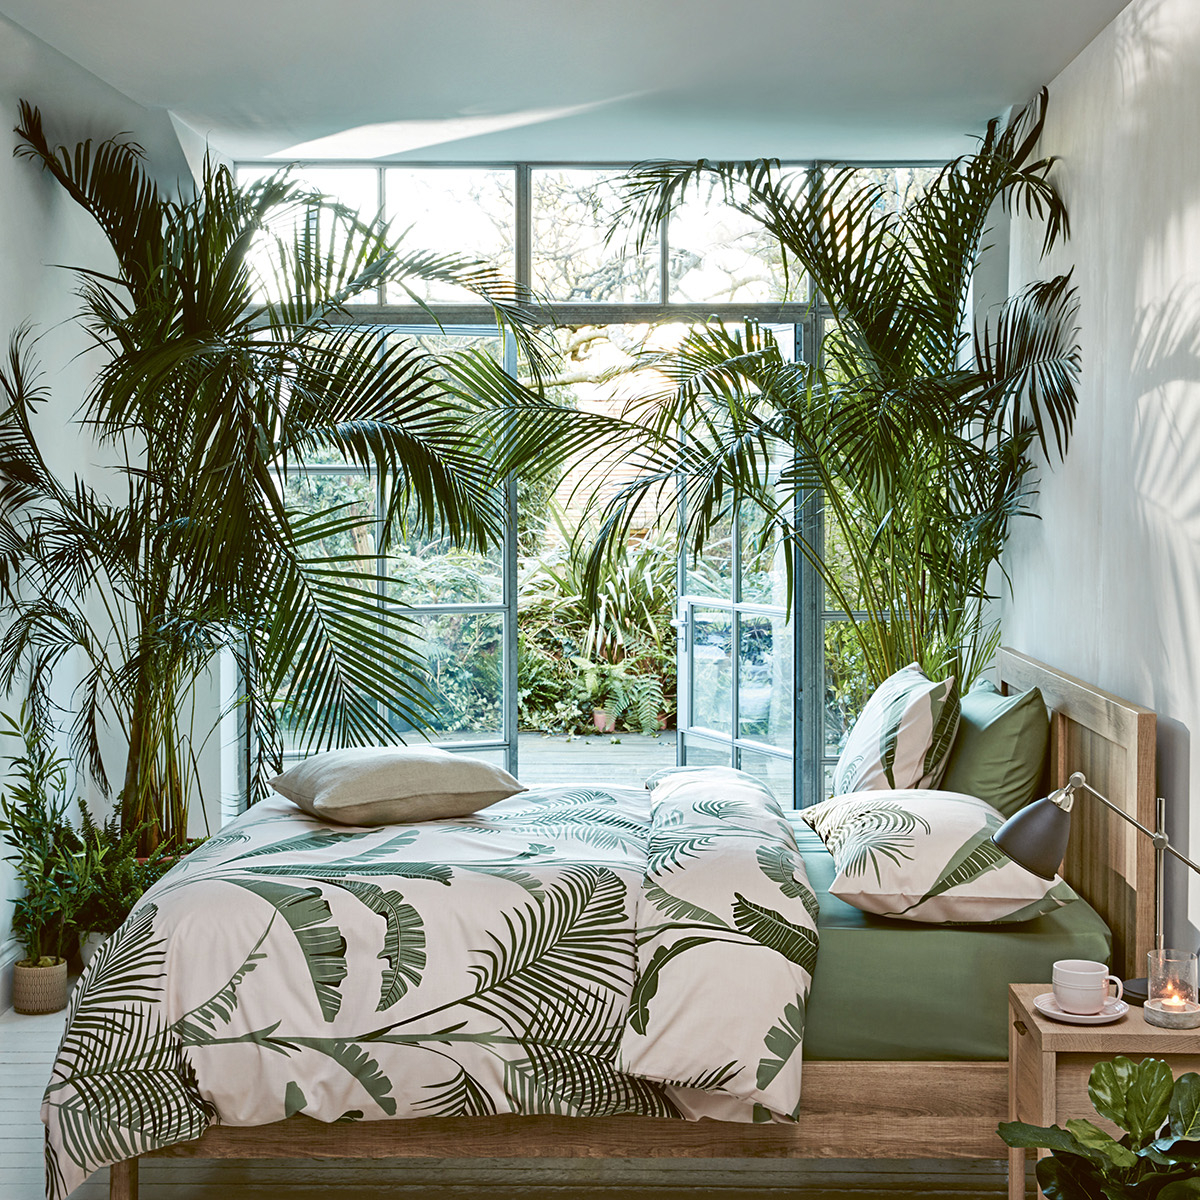 Looking at the soft tropics trend, Sophie Robinson advises to invite nature inside with living plants and go for it in volume to create a really dramatic lush look. A large palm print bedlinen can add to the drama. #bedroom #palmprint #sophierobinson #softropics